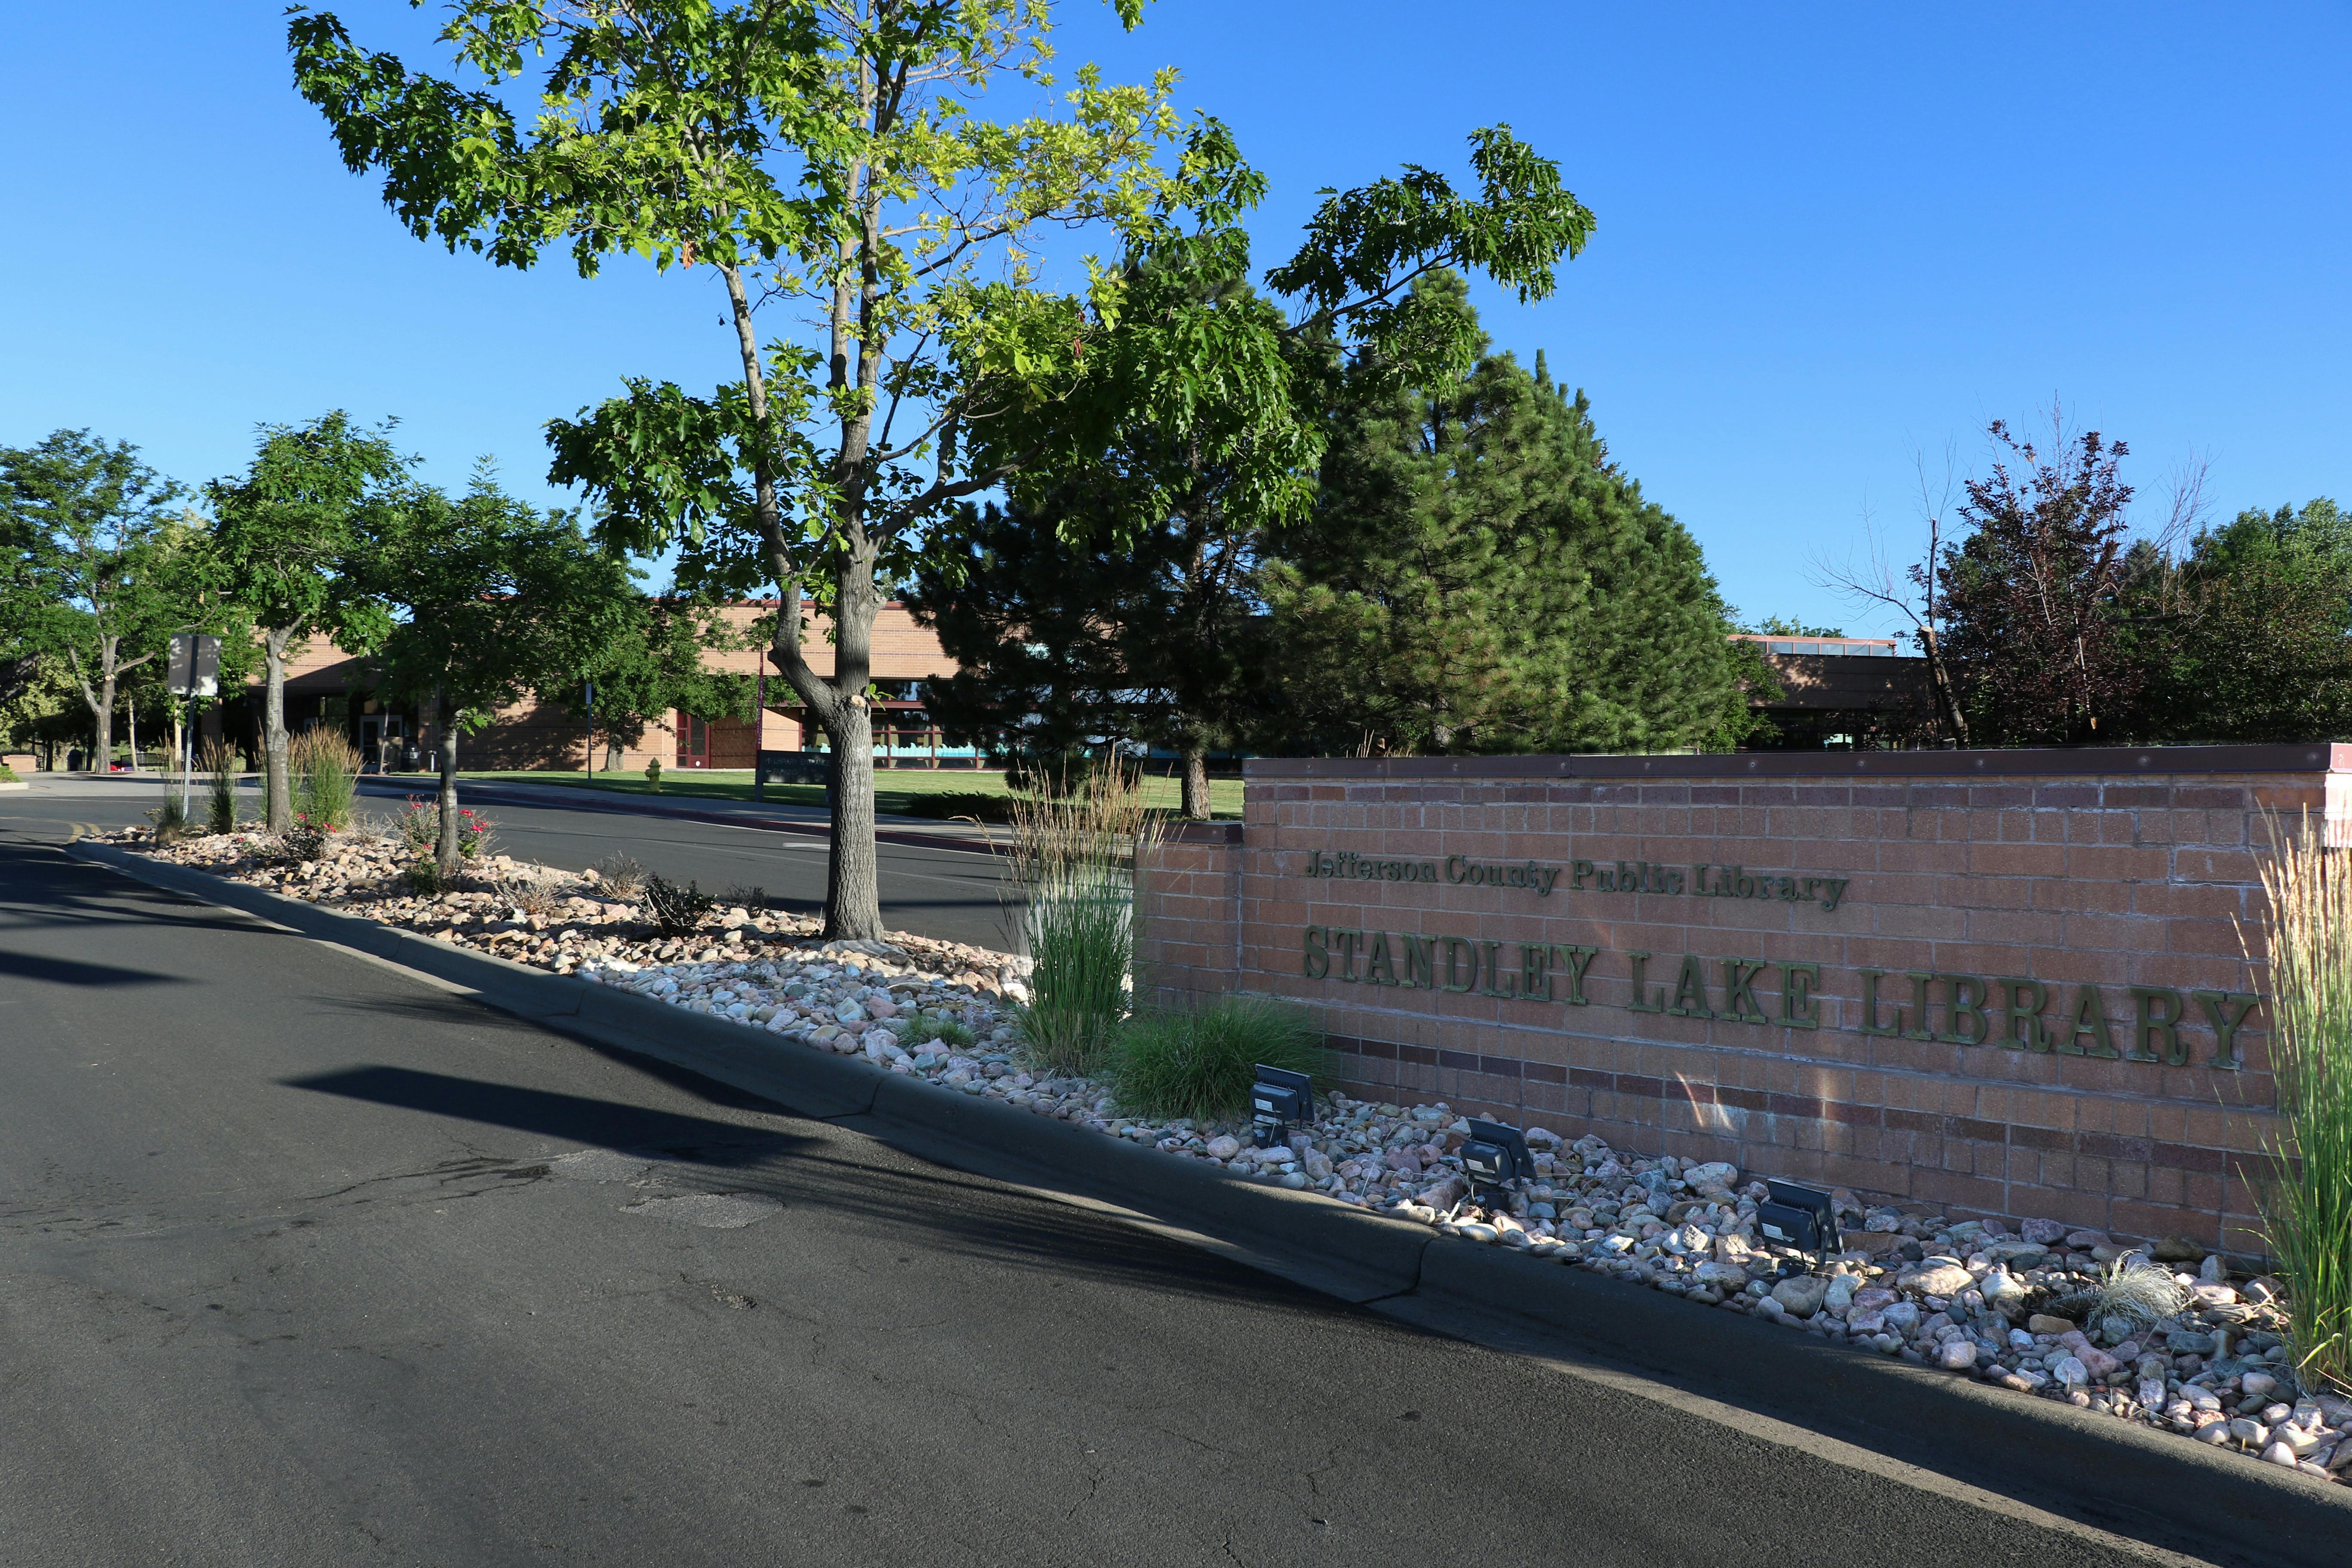 Standley Lake Library Entrance Sign